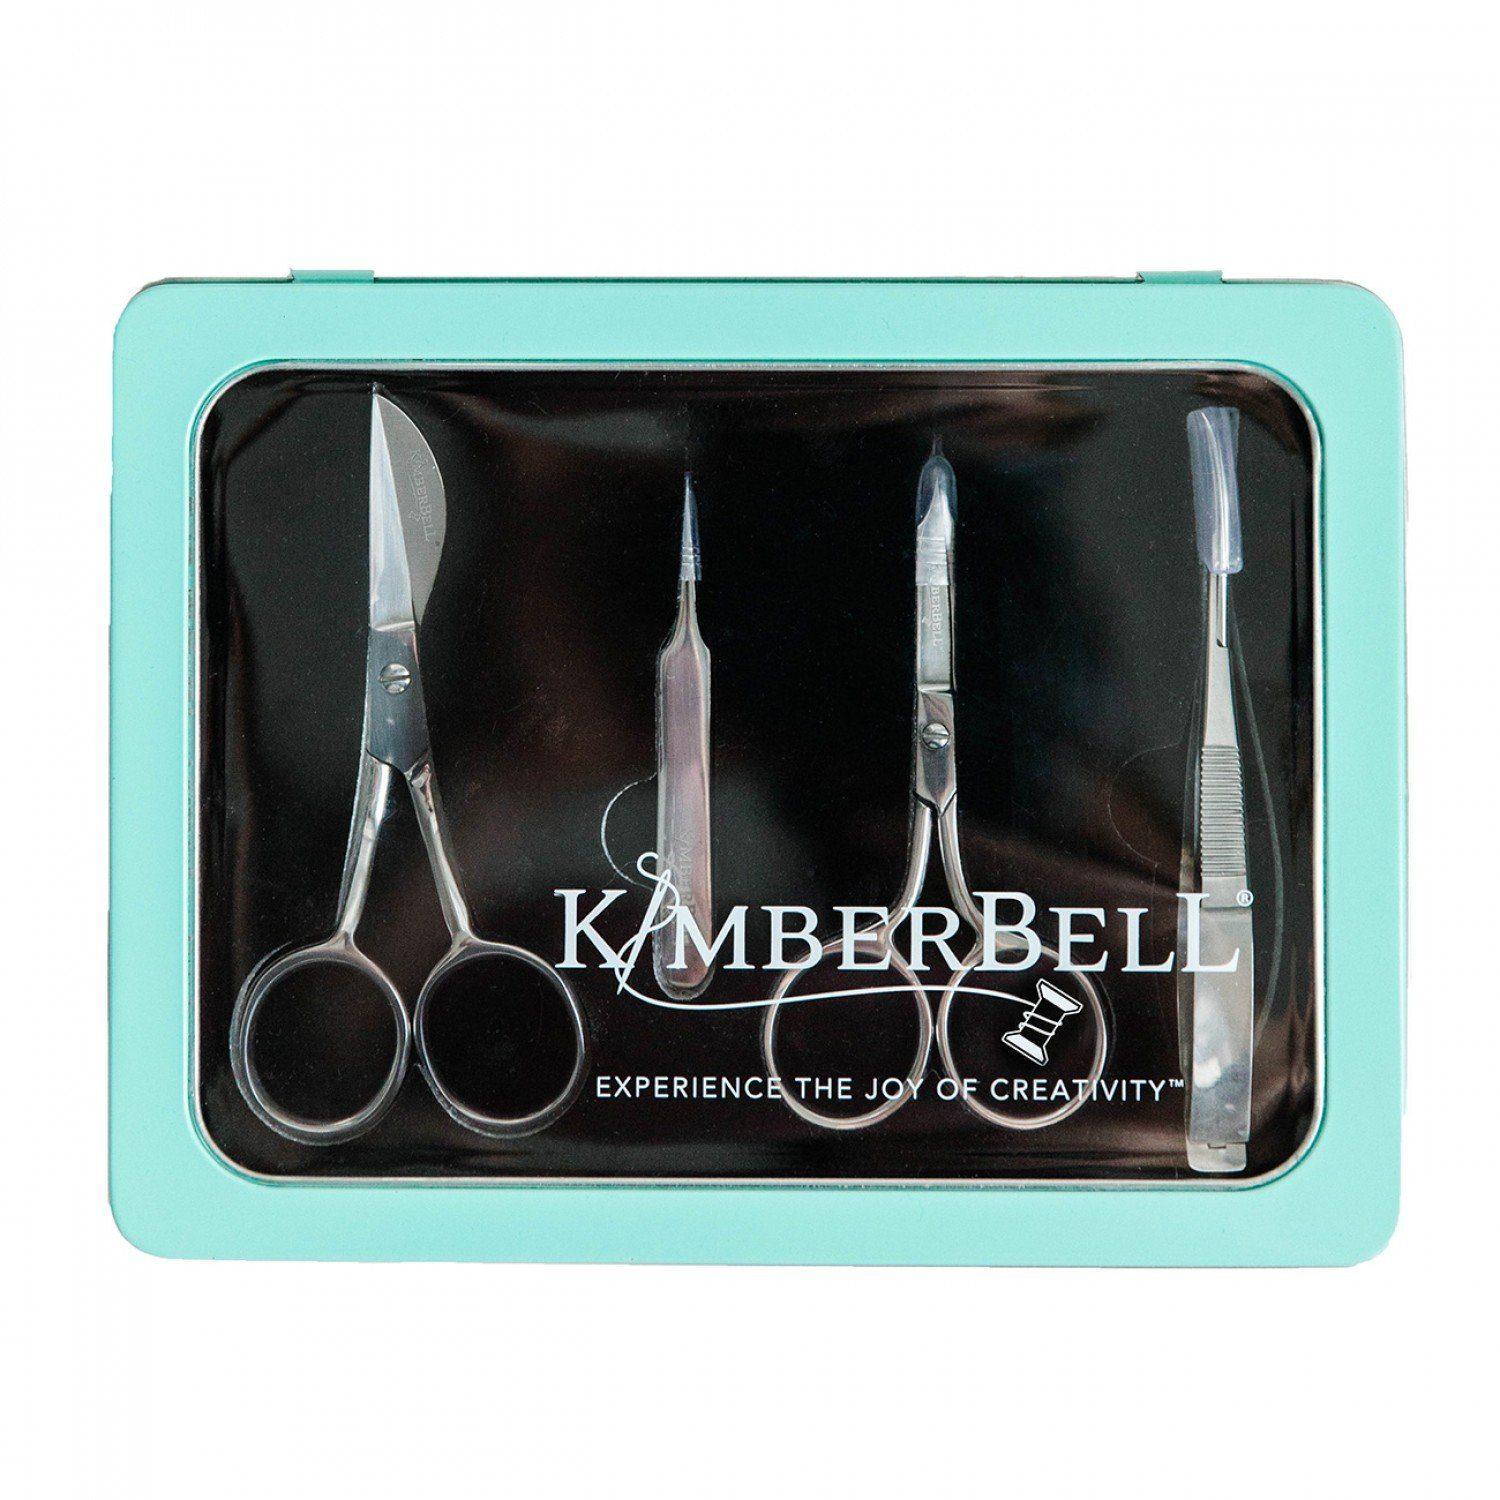 Deluxe Embroidery Tool & Scissor Set - Kimberbell - Kawartha Quilting and Sewing LTD.